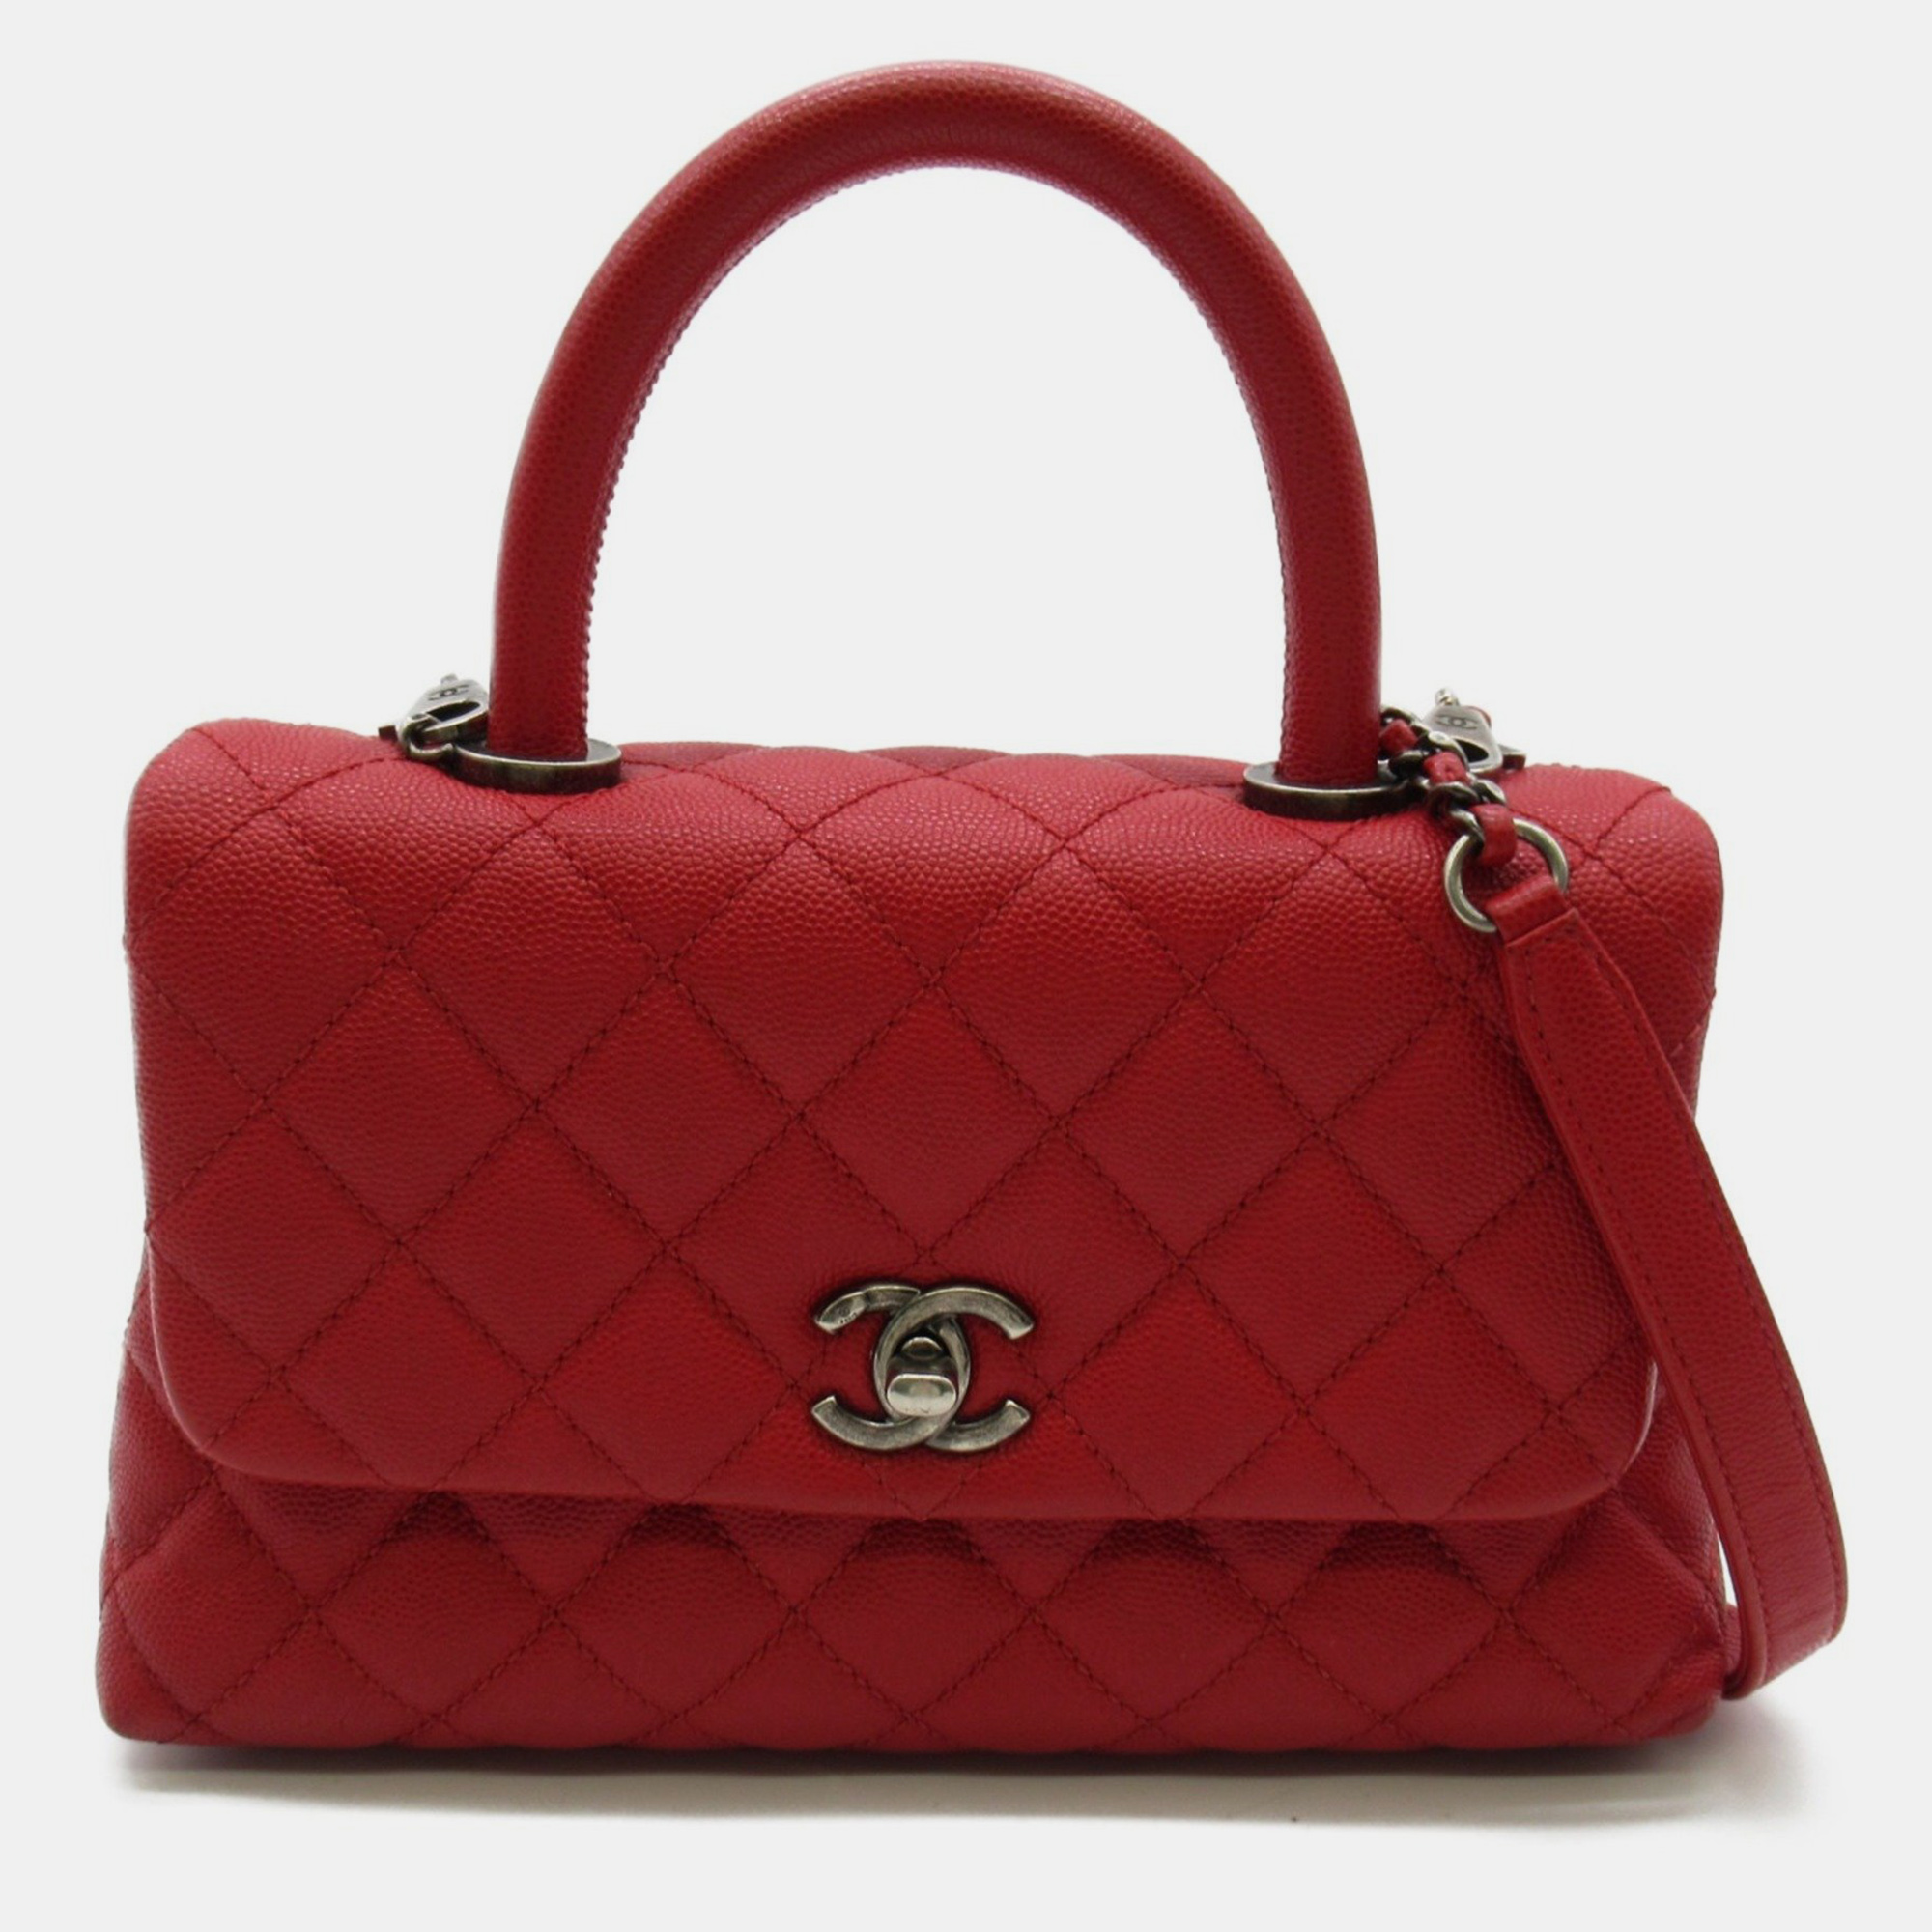 Chanel red leather xs coco handle top handle bag